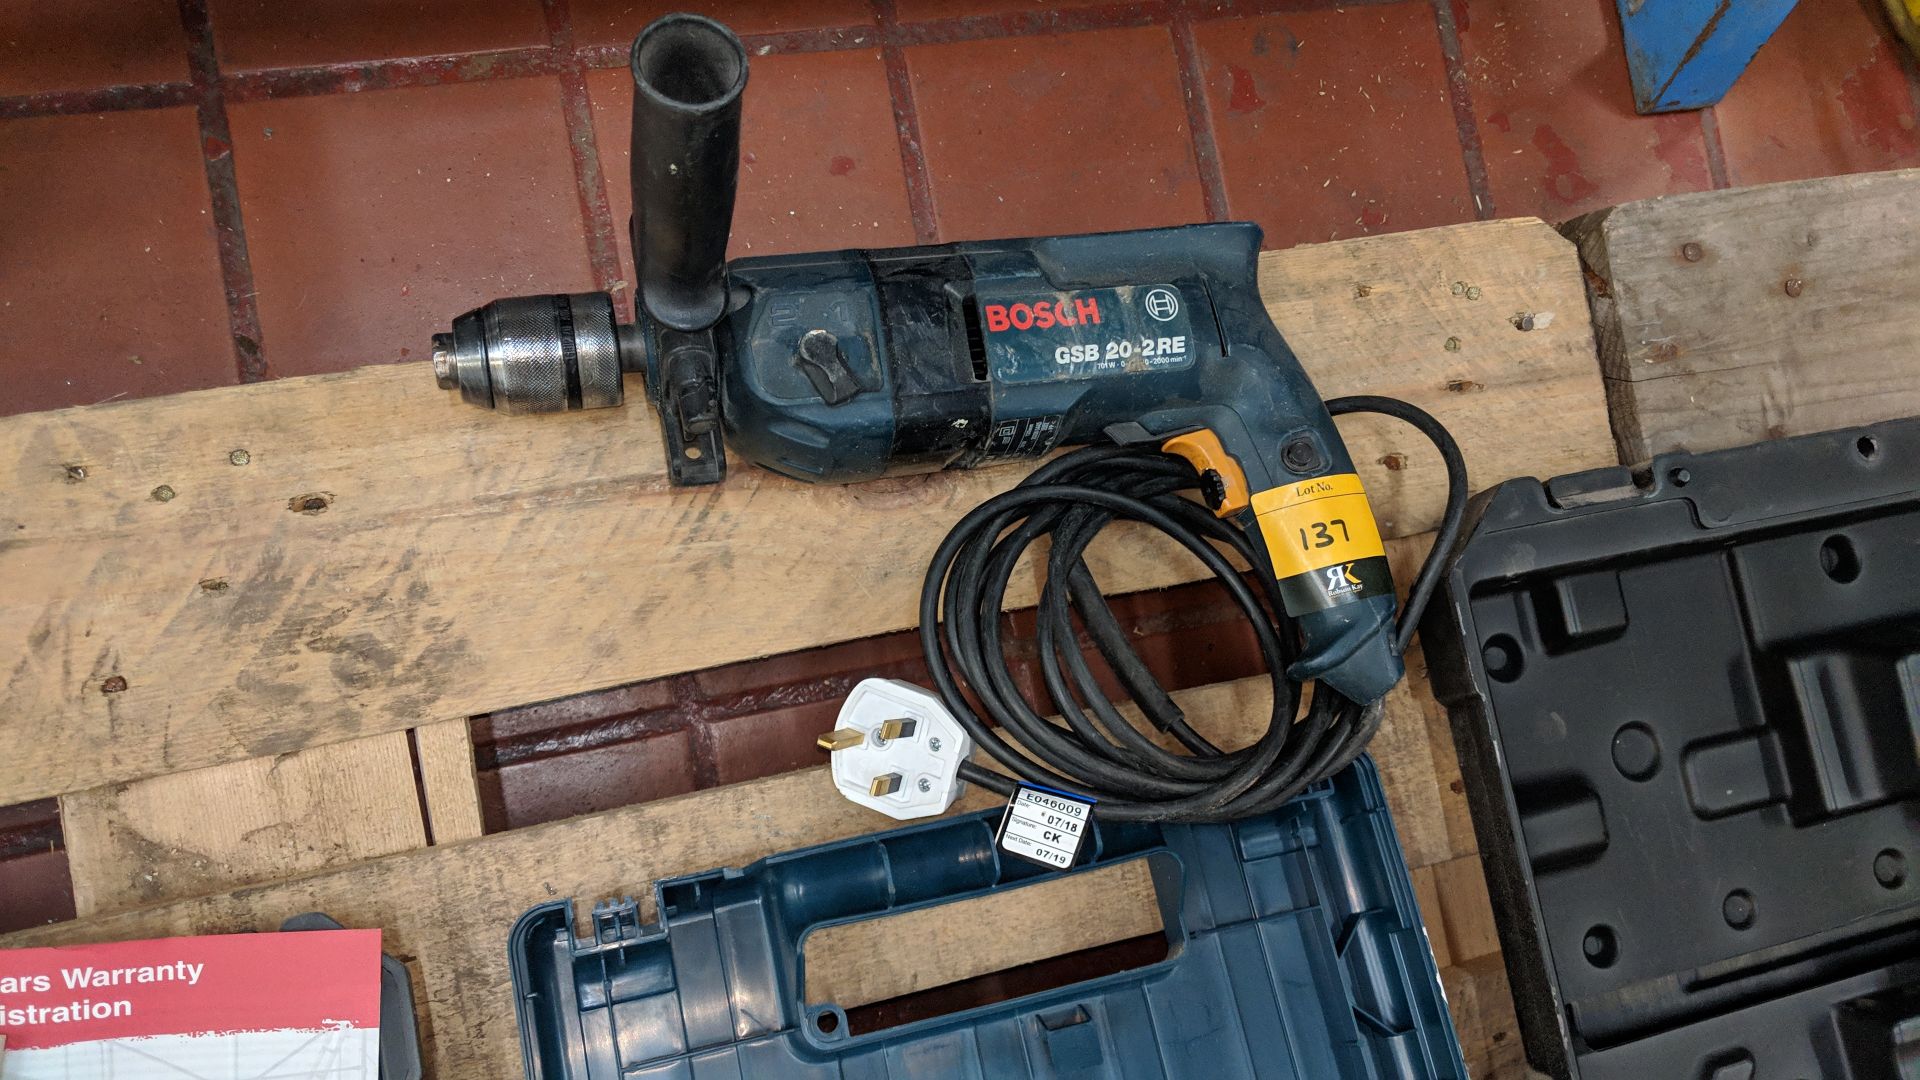 Bosch GSB 20-2RE professional corded drill This is one of a large number of lots in this sale - Image 2 of 4